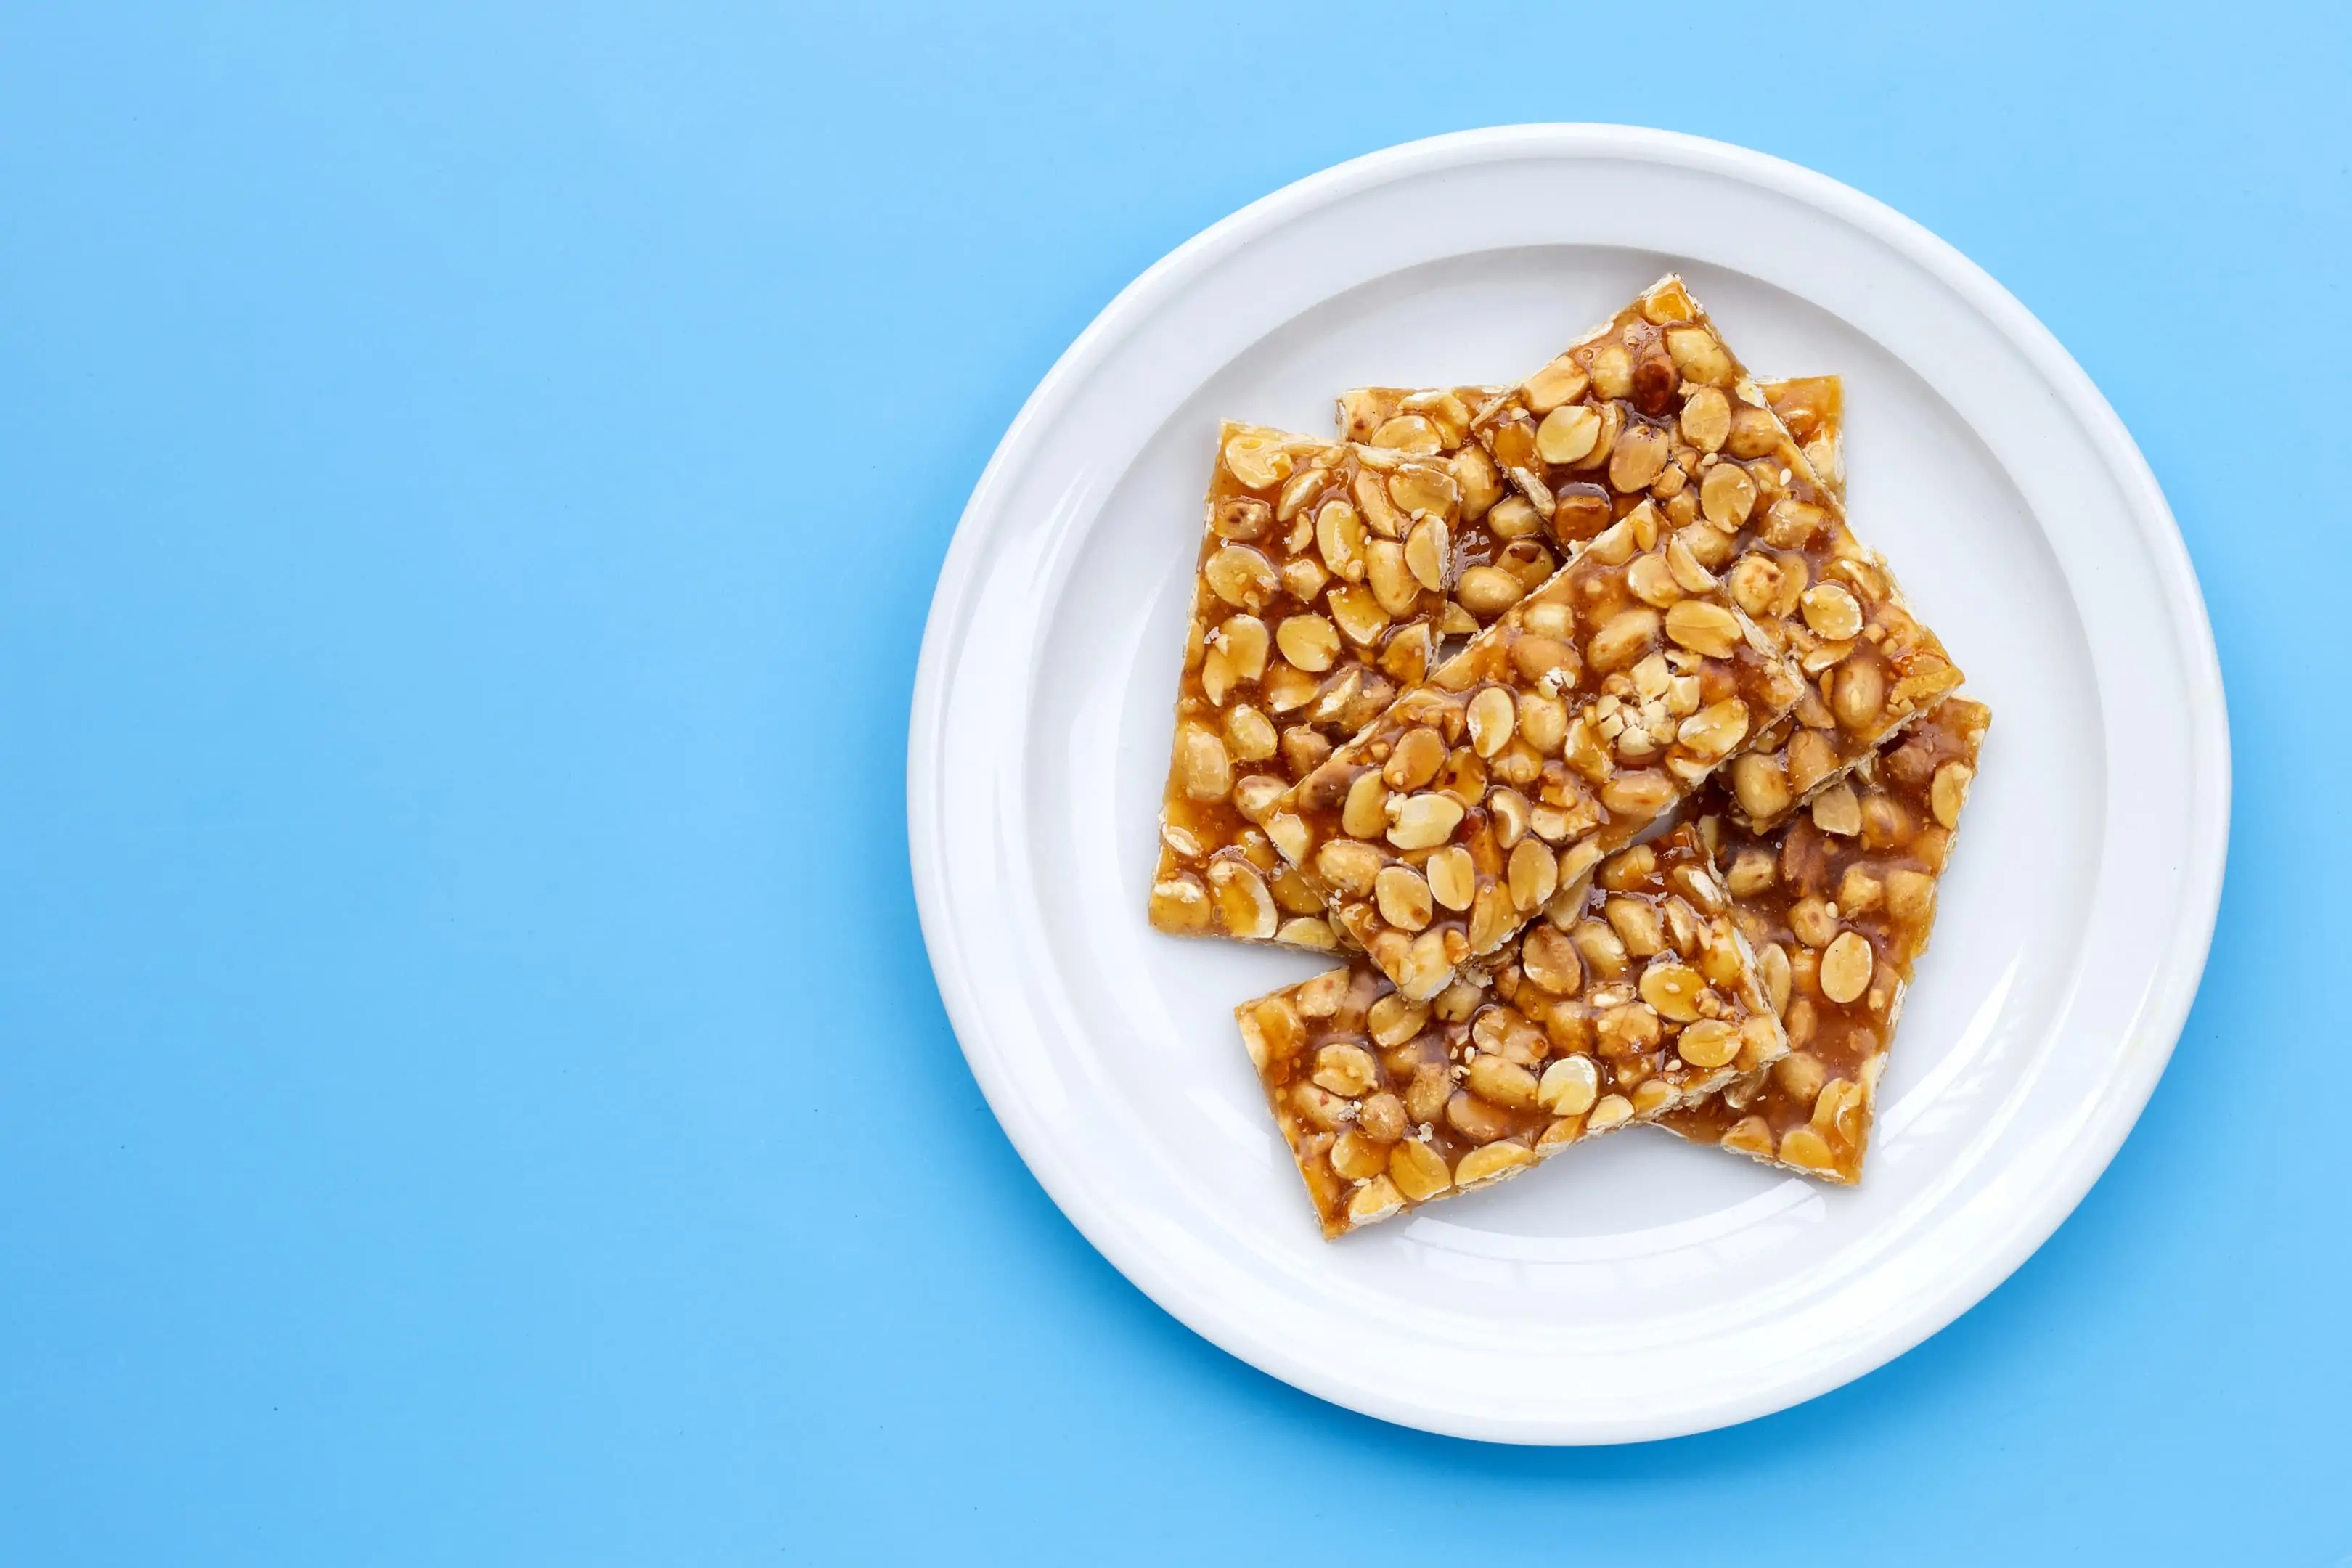 Kadalai mittai — peanuts and jaggery bars in a plate on blue background